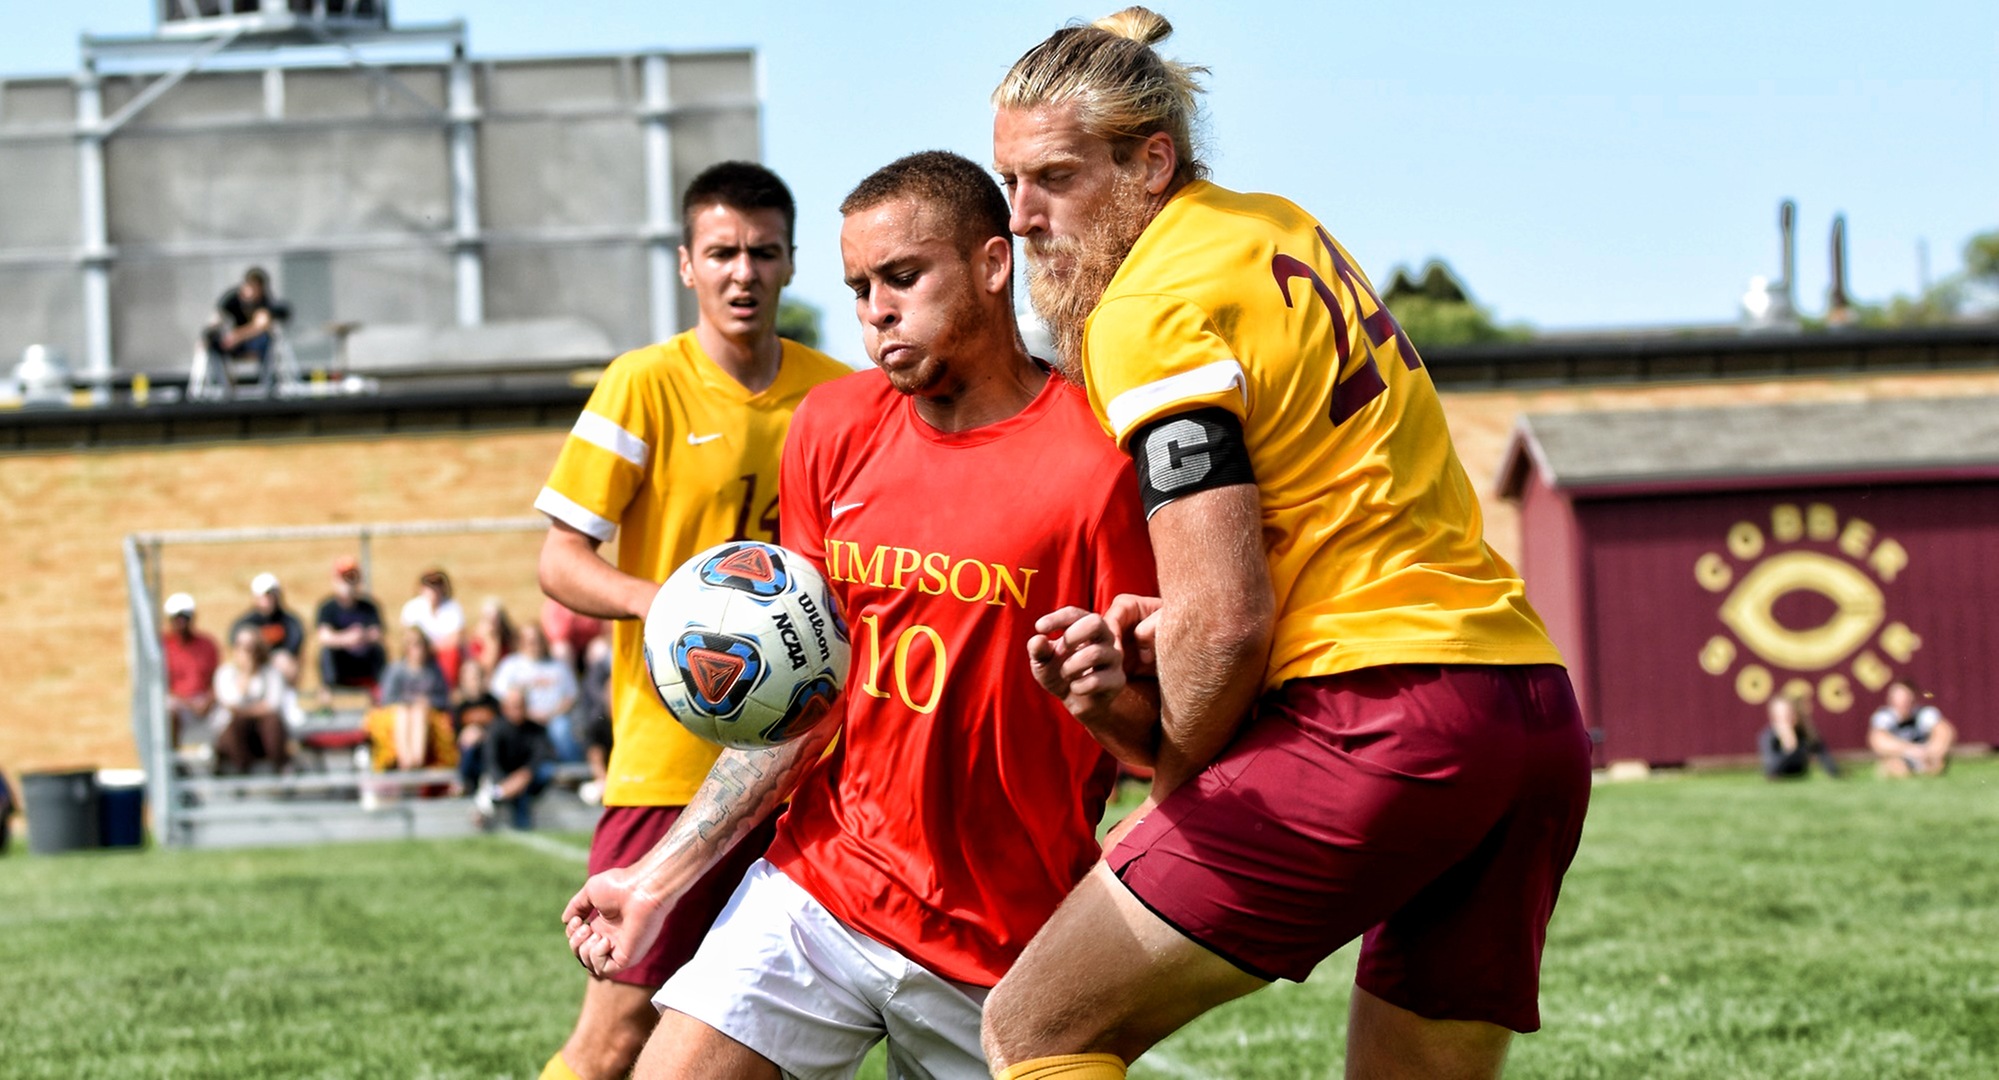 Senior Austin Peterson scored the game-winning goal in the Cobbers' win over Simpson.